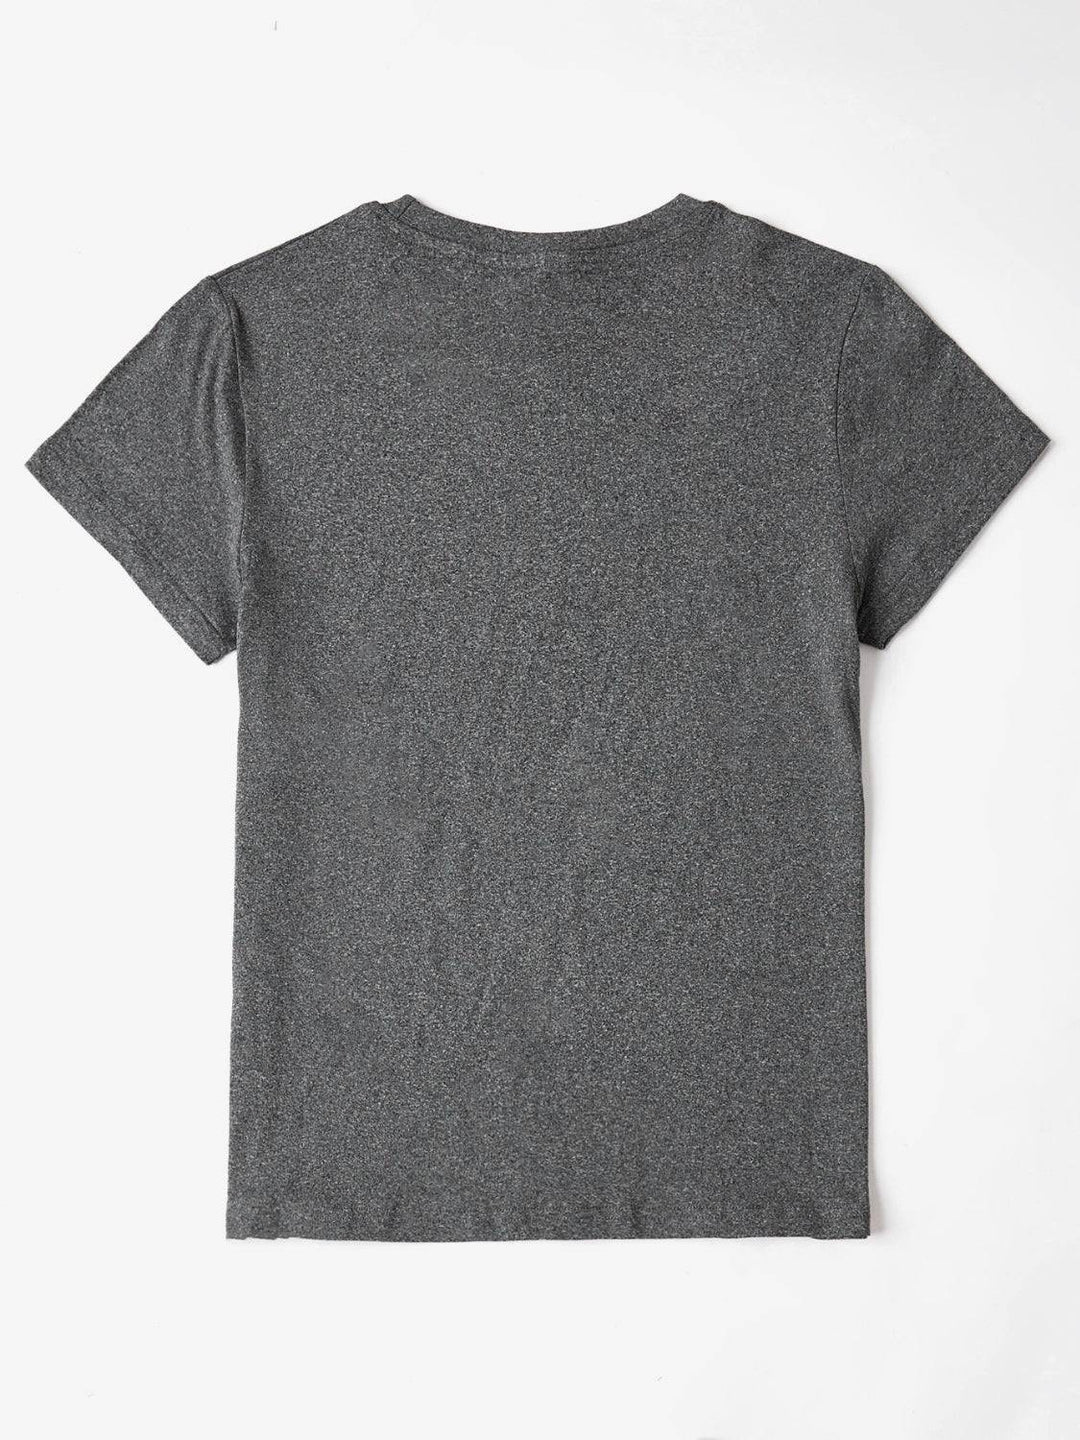 a grey t - shirt on a white background